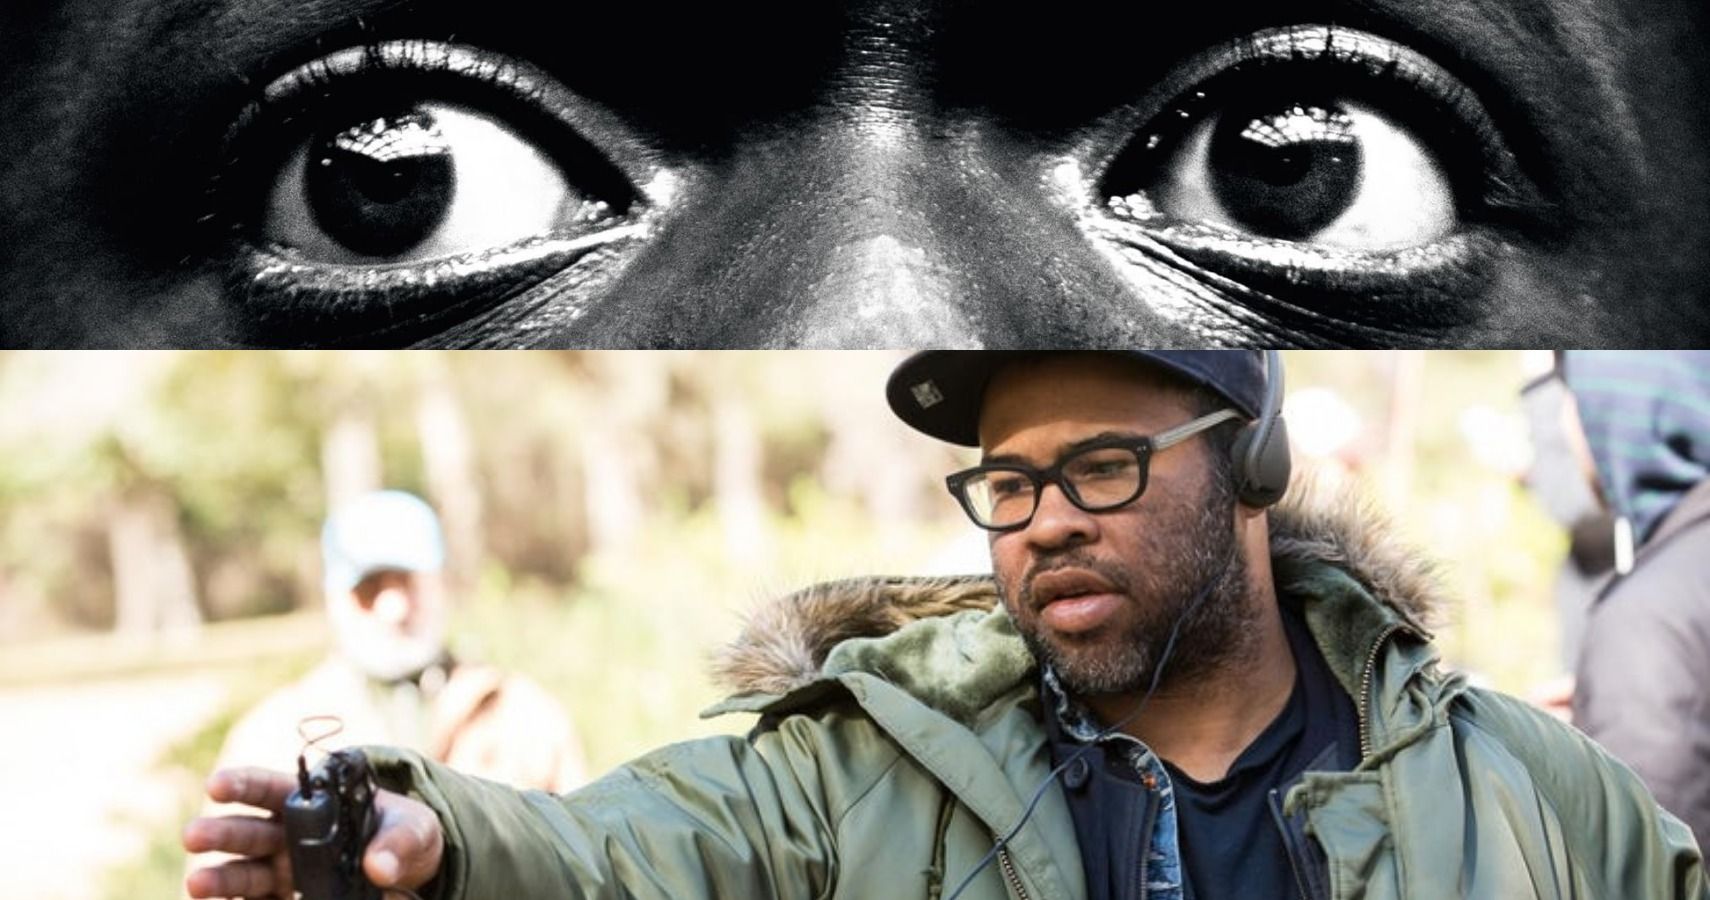 A split-screen image showing the eye close-up teaser of Get Out against a behind-the-scenes take of Jordan Peele directing the cast